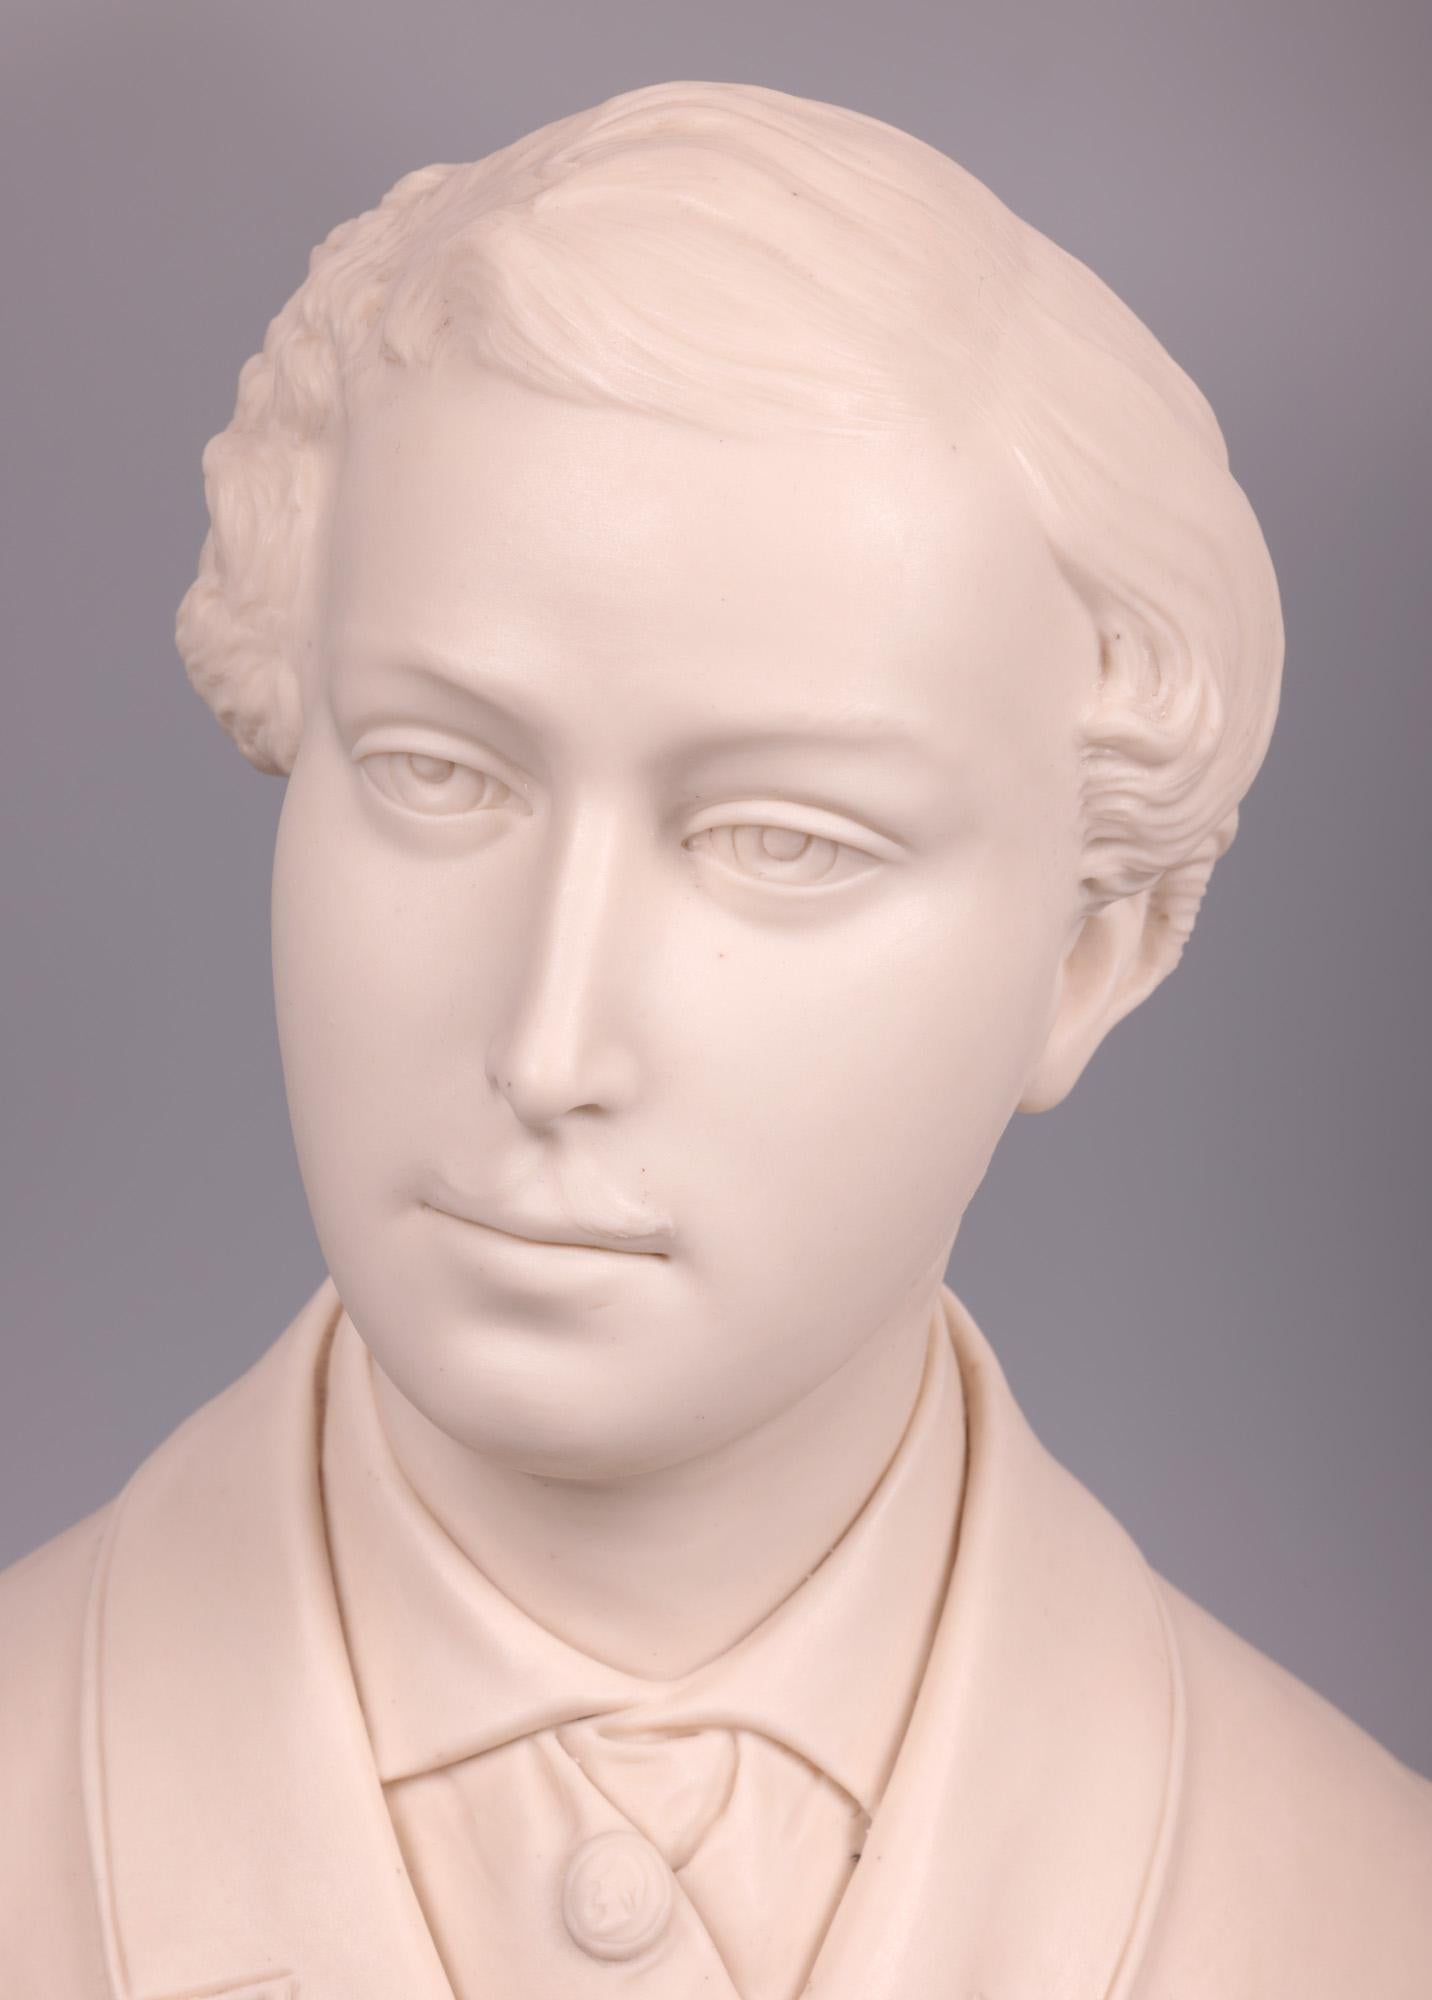 A very fine antique Coalport parian bust of the Prince of Wales sculpted by John Rose and dated 1863. Probably made to commemorate the forthcoming marriage of Albert Edward Prince of Wales to Princess Alexandra of Denmark in 1863 the parian bust